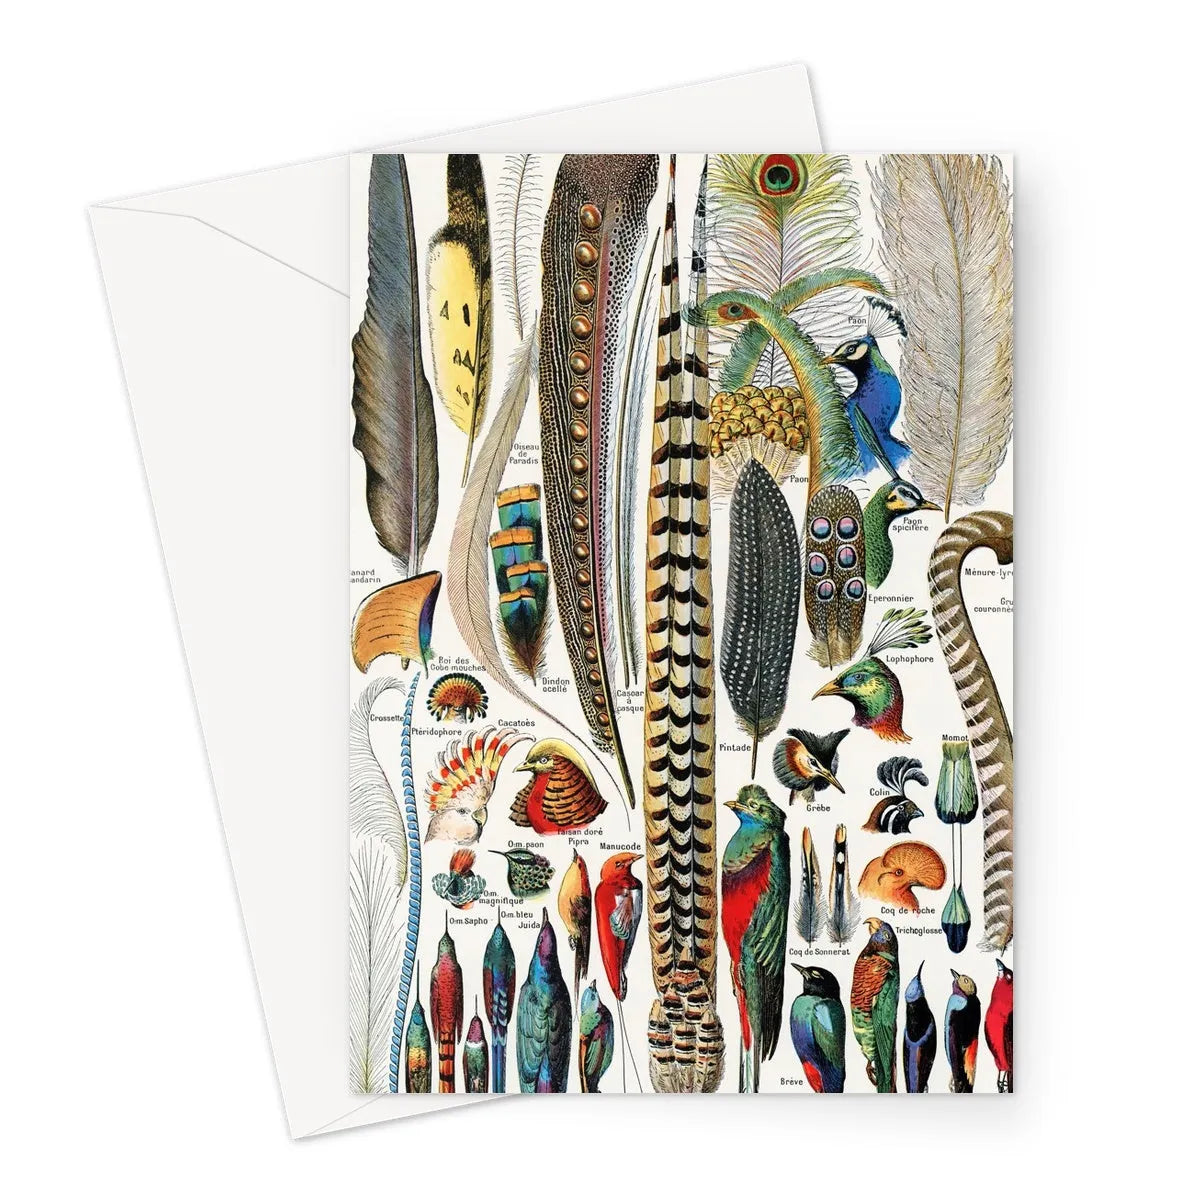 Plumes - Feathers By Adolphe Millot Greeting Card - A5 Portrait / 1 Card - Greeting & Note Cards - Aesthetic Art